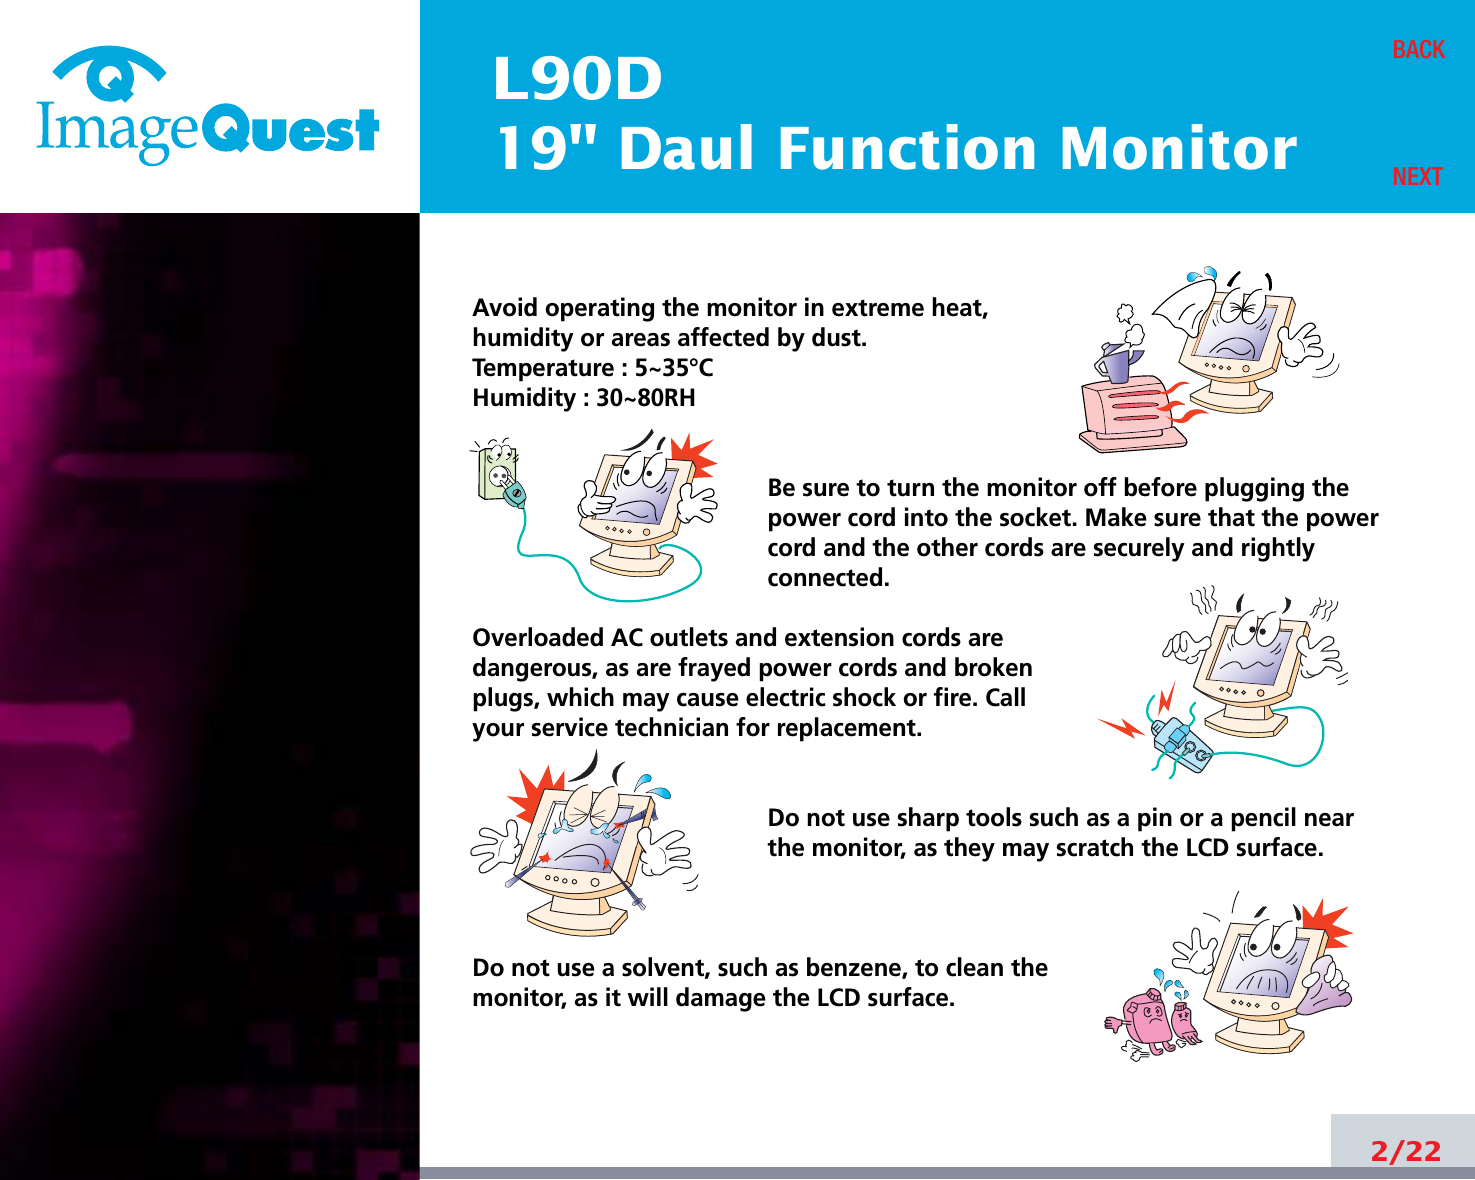 L90D19&quot; Daul Function Monitor2/22BACKNEXTAvoid operating the monitor in extreme heat, humidity or areas affected by dust. Temperature : 5~35°CHumidity : 30~80RH Be sure to turn the monitor off before plugging thepower cord into the socket. Make sure that the powercord and the other cords are securely and rightlyconnected.Overloaded AC outlets and extension cords are dangerous, as are frayed power cords and broken plugs, which may cause electric shock or fire. Call your service technician for replacement.Do not use sharp tools such as a pin or a pencil near the monitor, as they may scratch the LCD surface.Do not use a solvent, such as benzene, to clean the monitor, as it will damage the LCD surface.